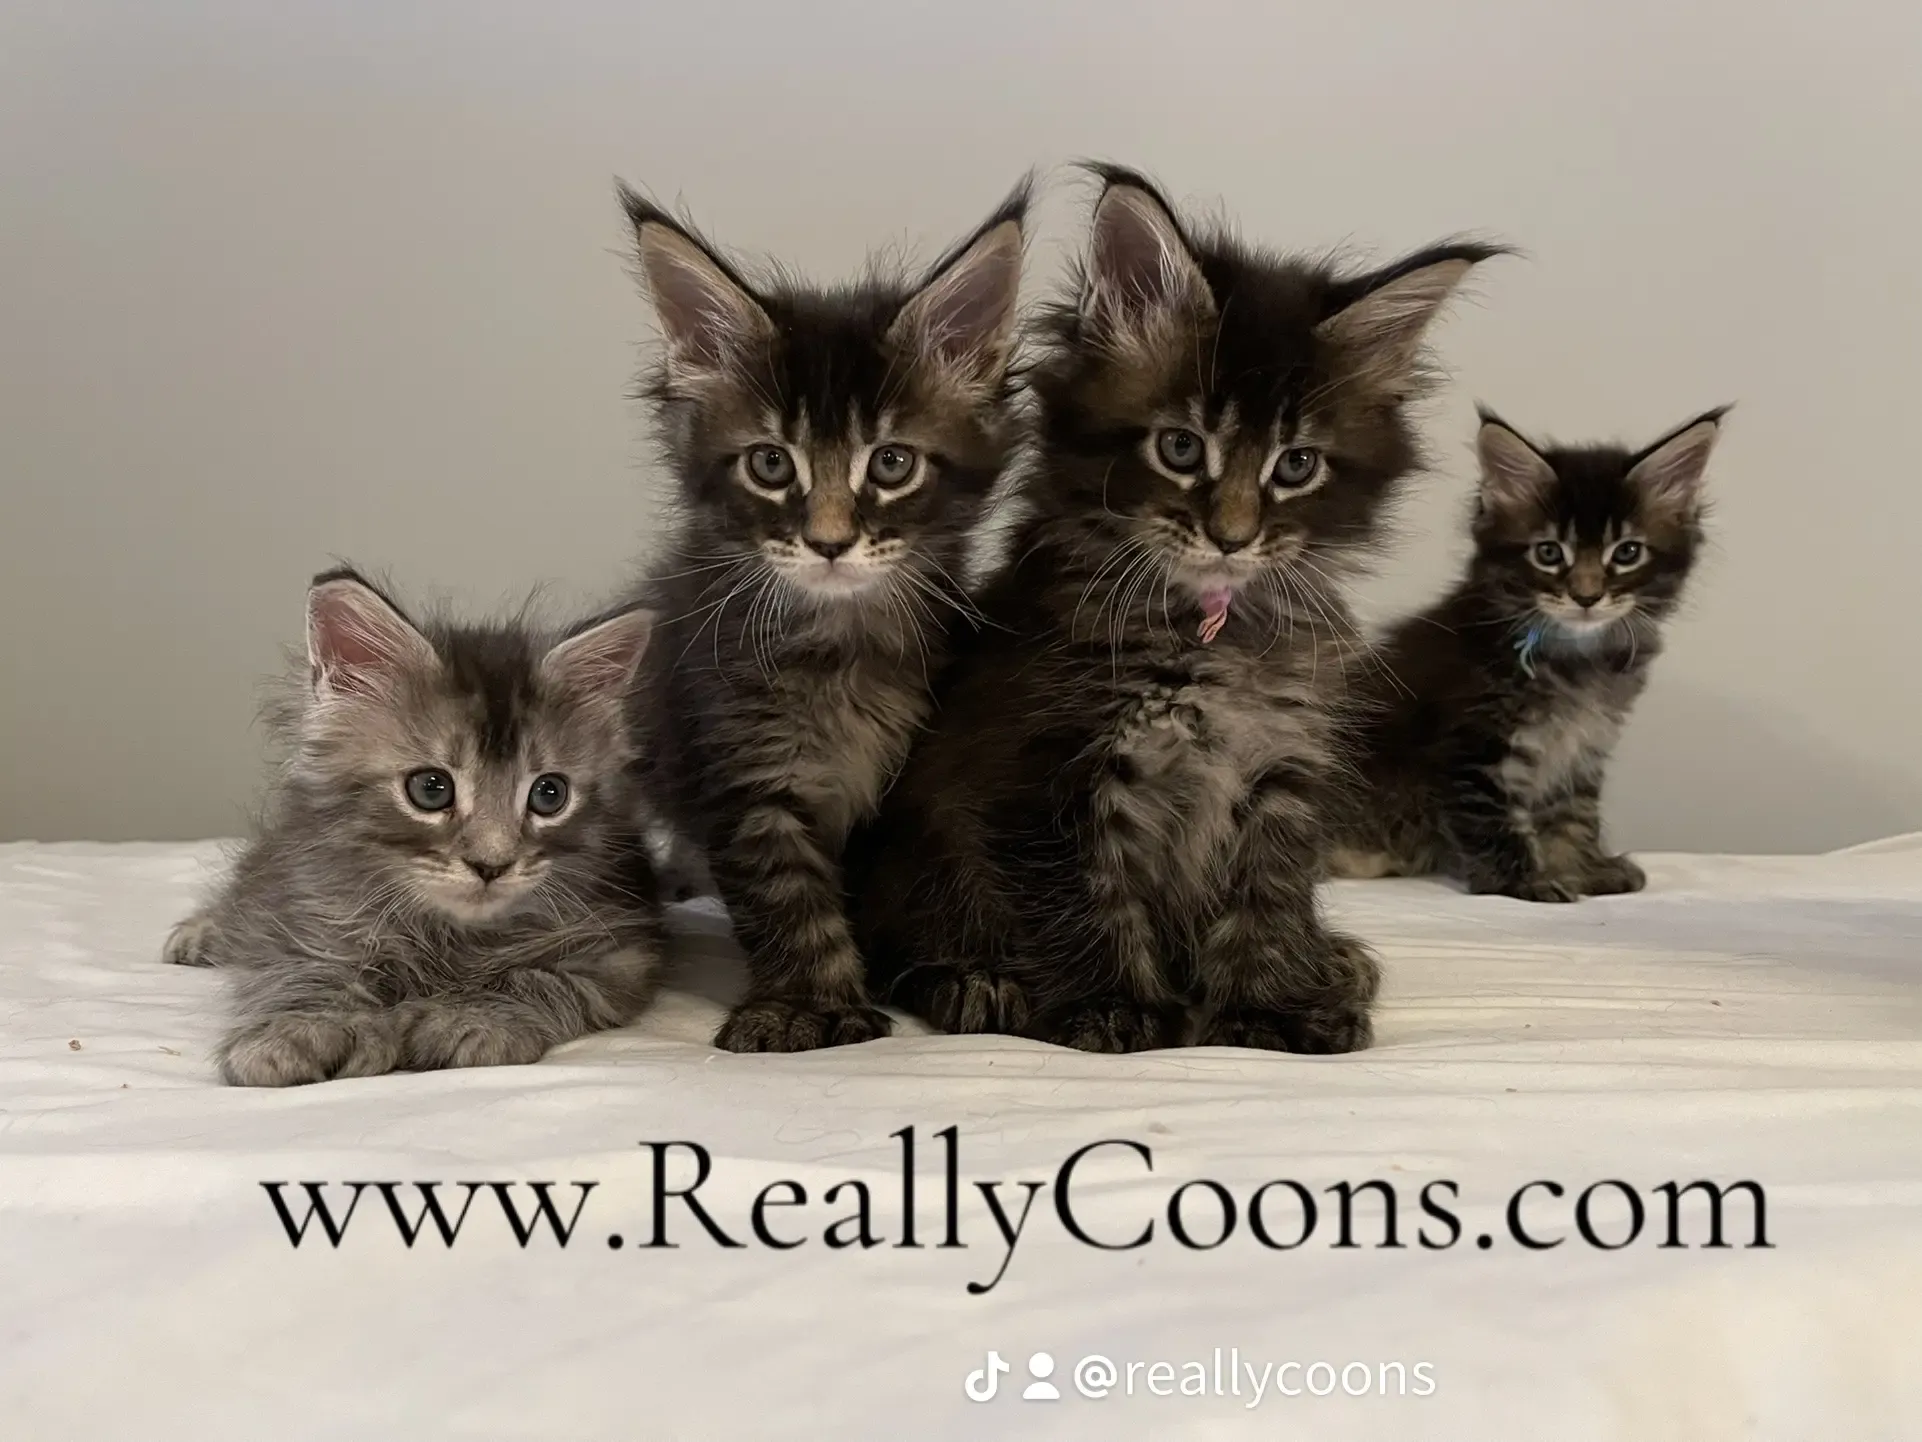 Some kittens from one of our recent litters.